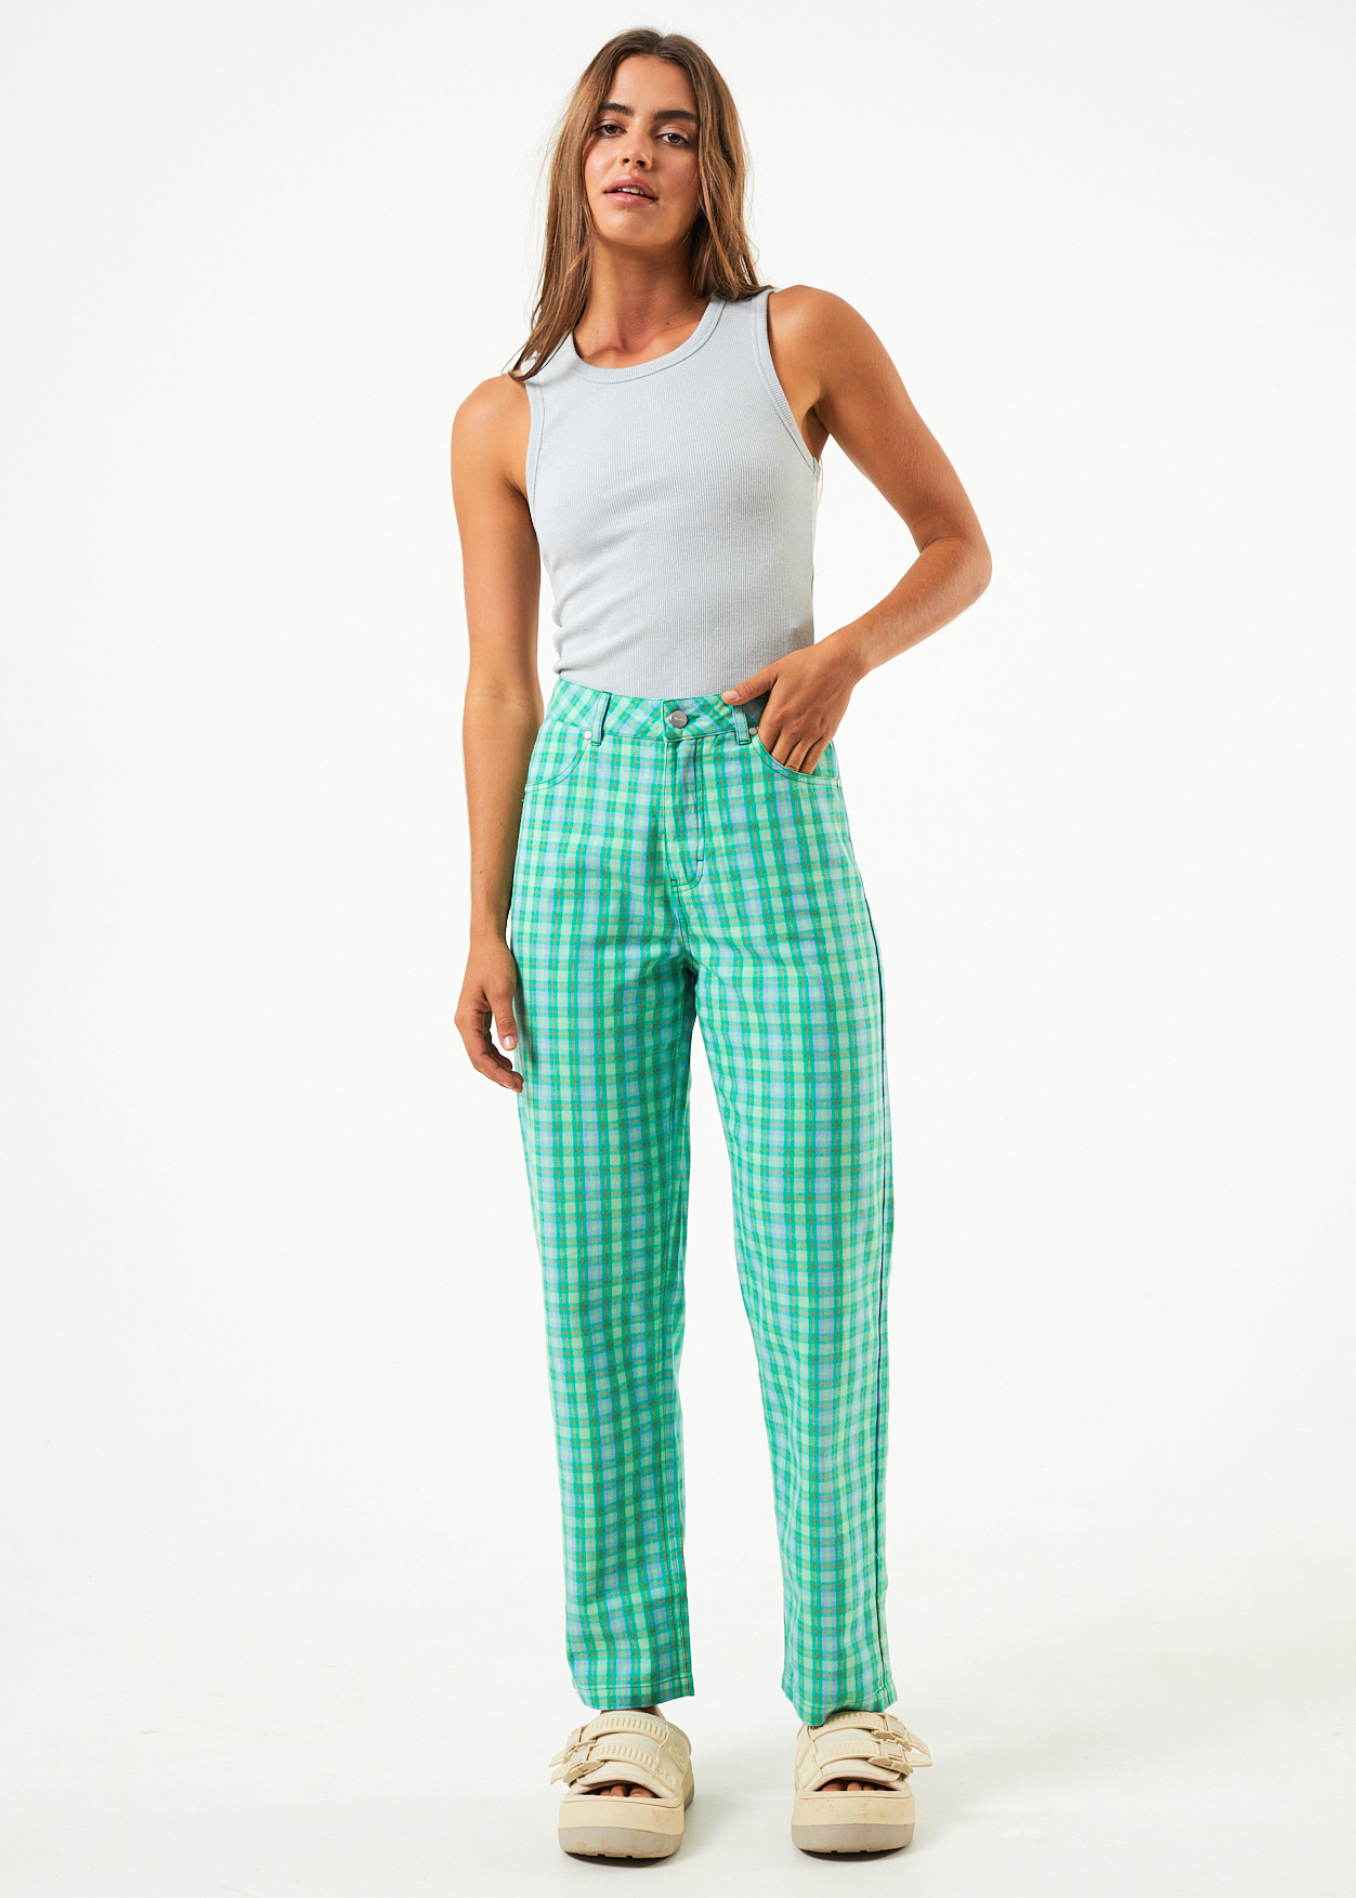 How to Wear Green Plaid Pants Top 13 Stylish Outfit Ideas for Ladies   FMagcom